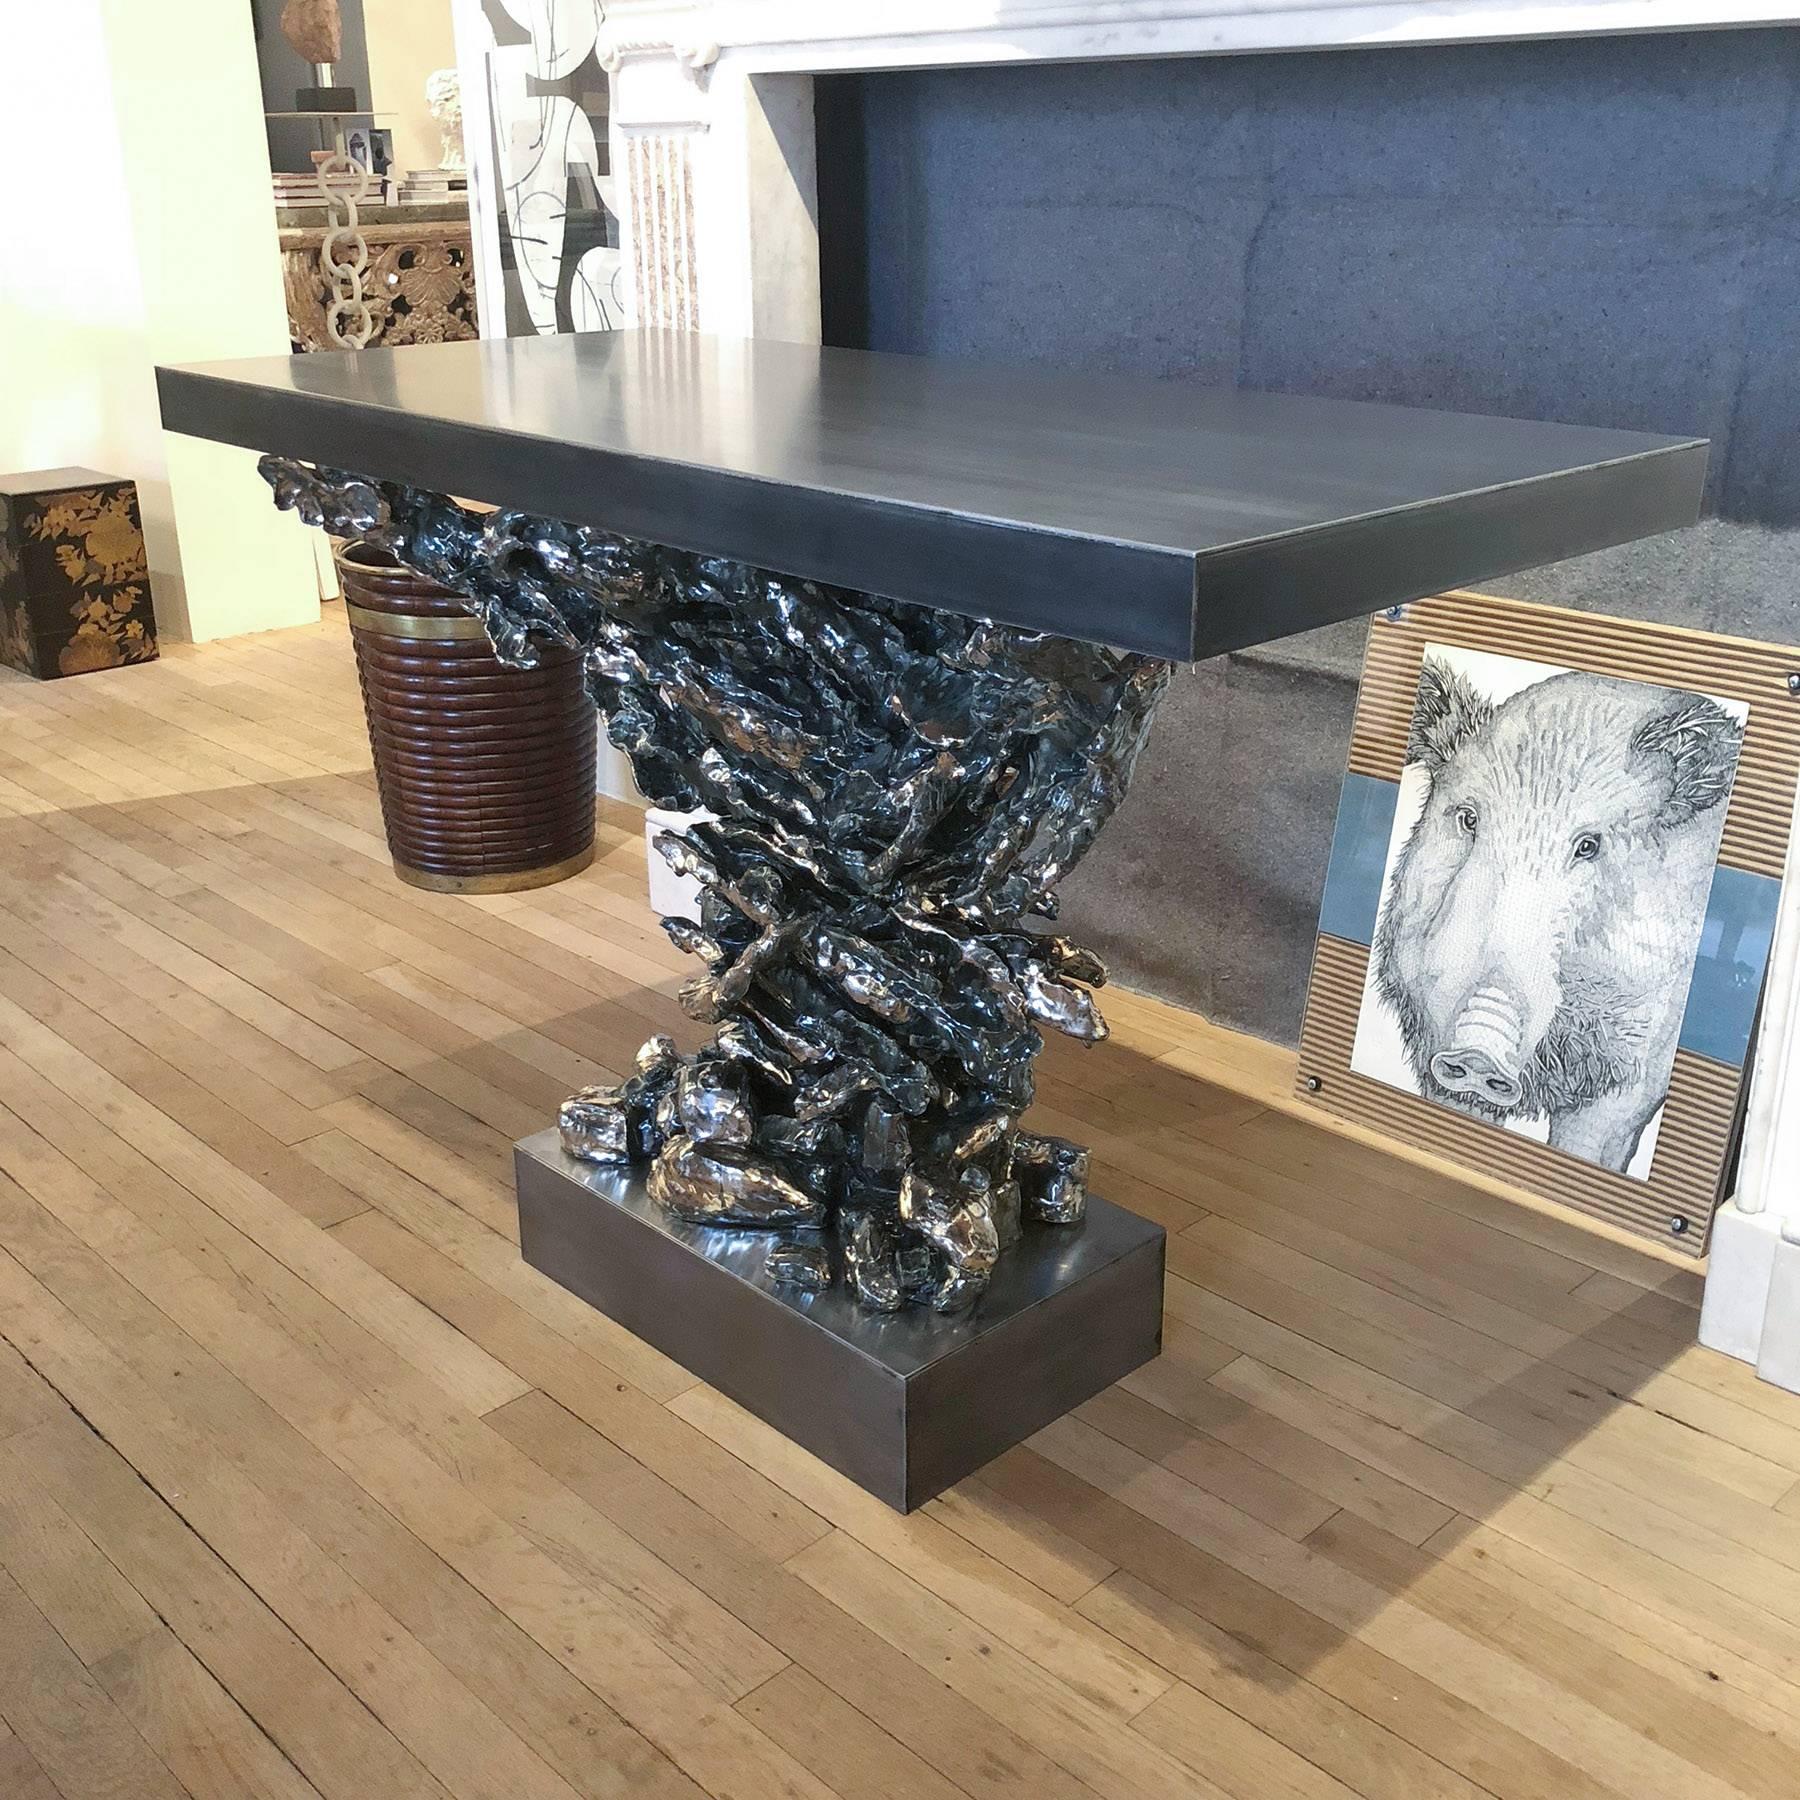 Gilded and glazed ceramic eagle form console with steel top and plinth
By Eve Kaplan
Contemporary, available by commission.
Measure: Height 31 inches, width 44 inches, depth 21 inches. 

[7846b].
 